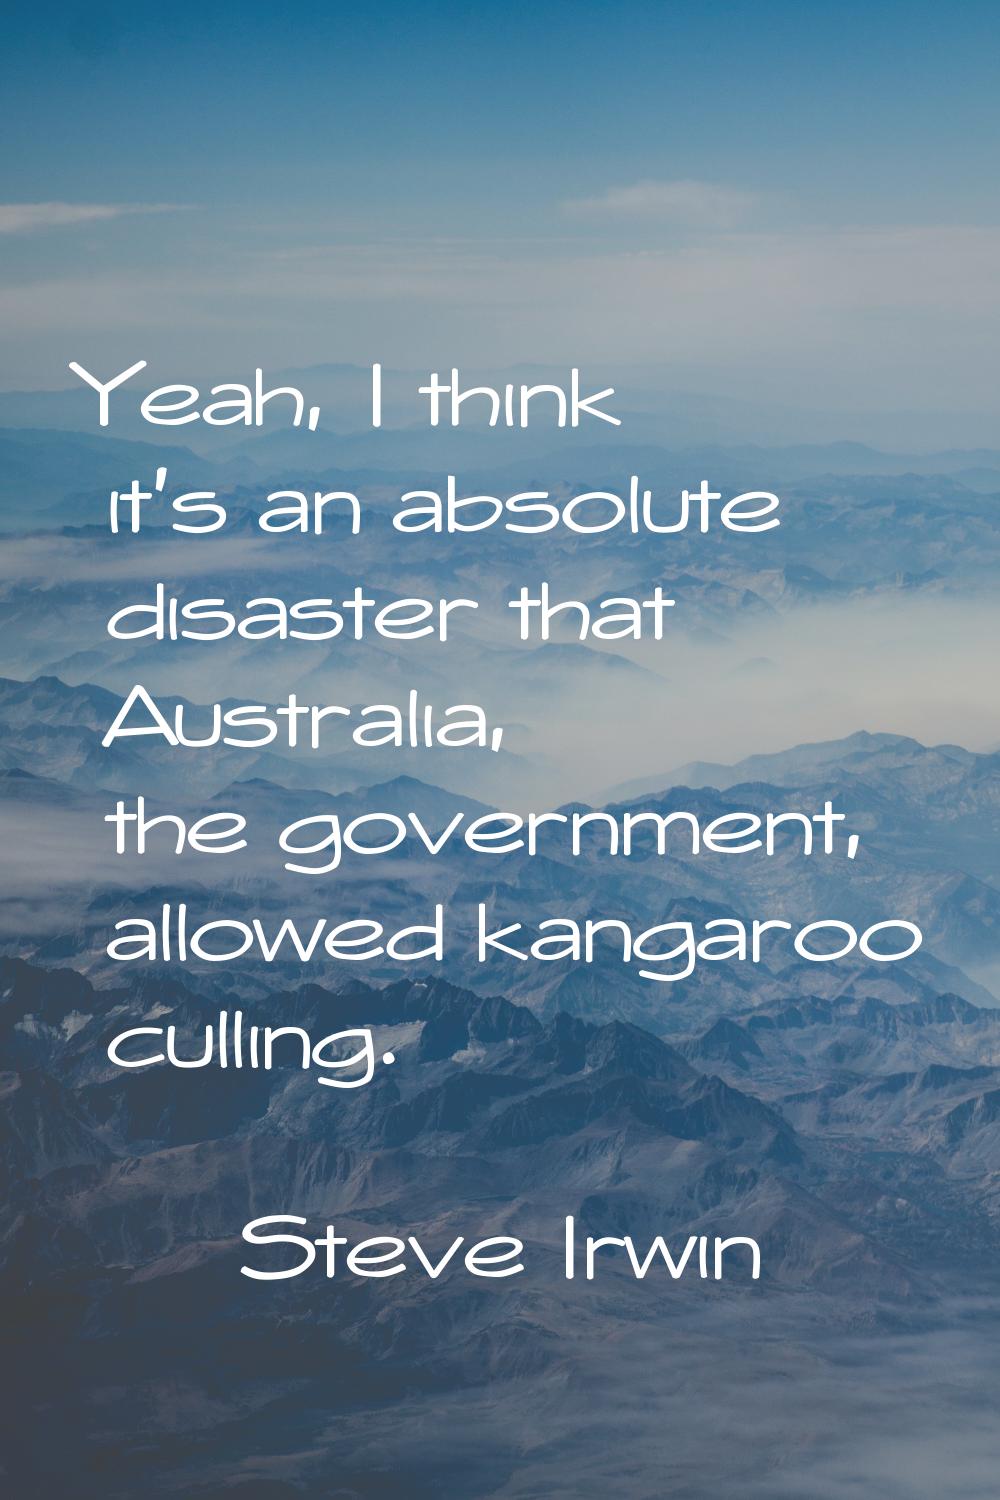 Yeah, I think it's an absolute disaster that Australia, the government, allowed kangaroo culling.